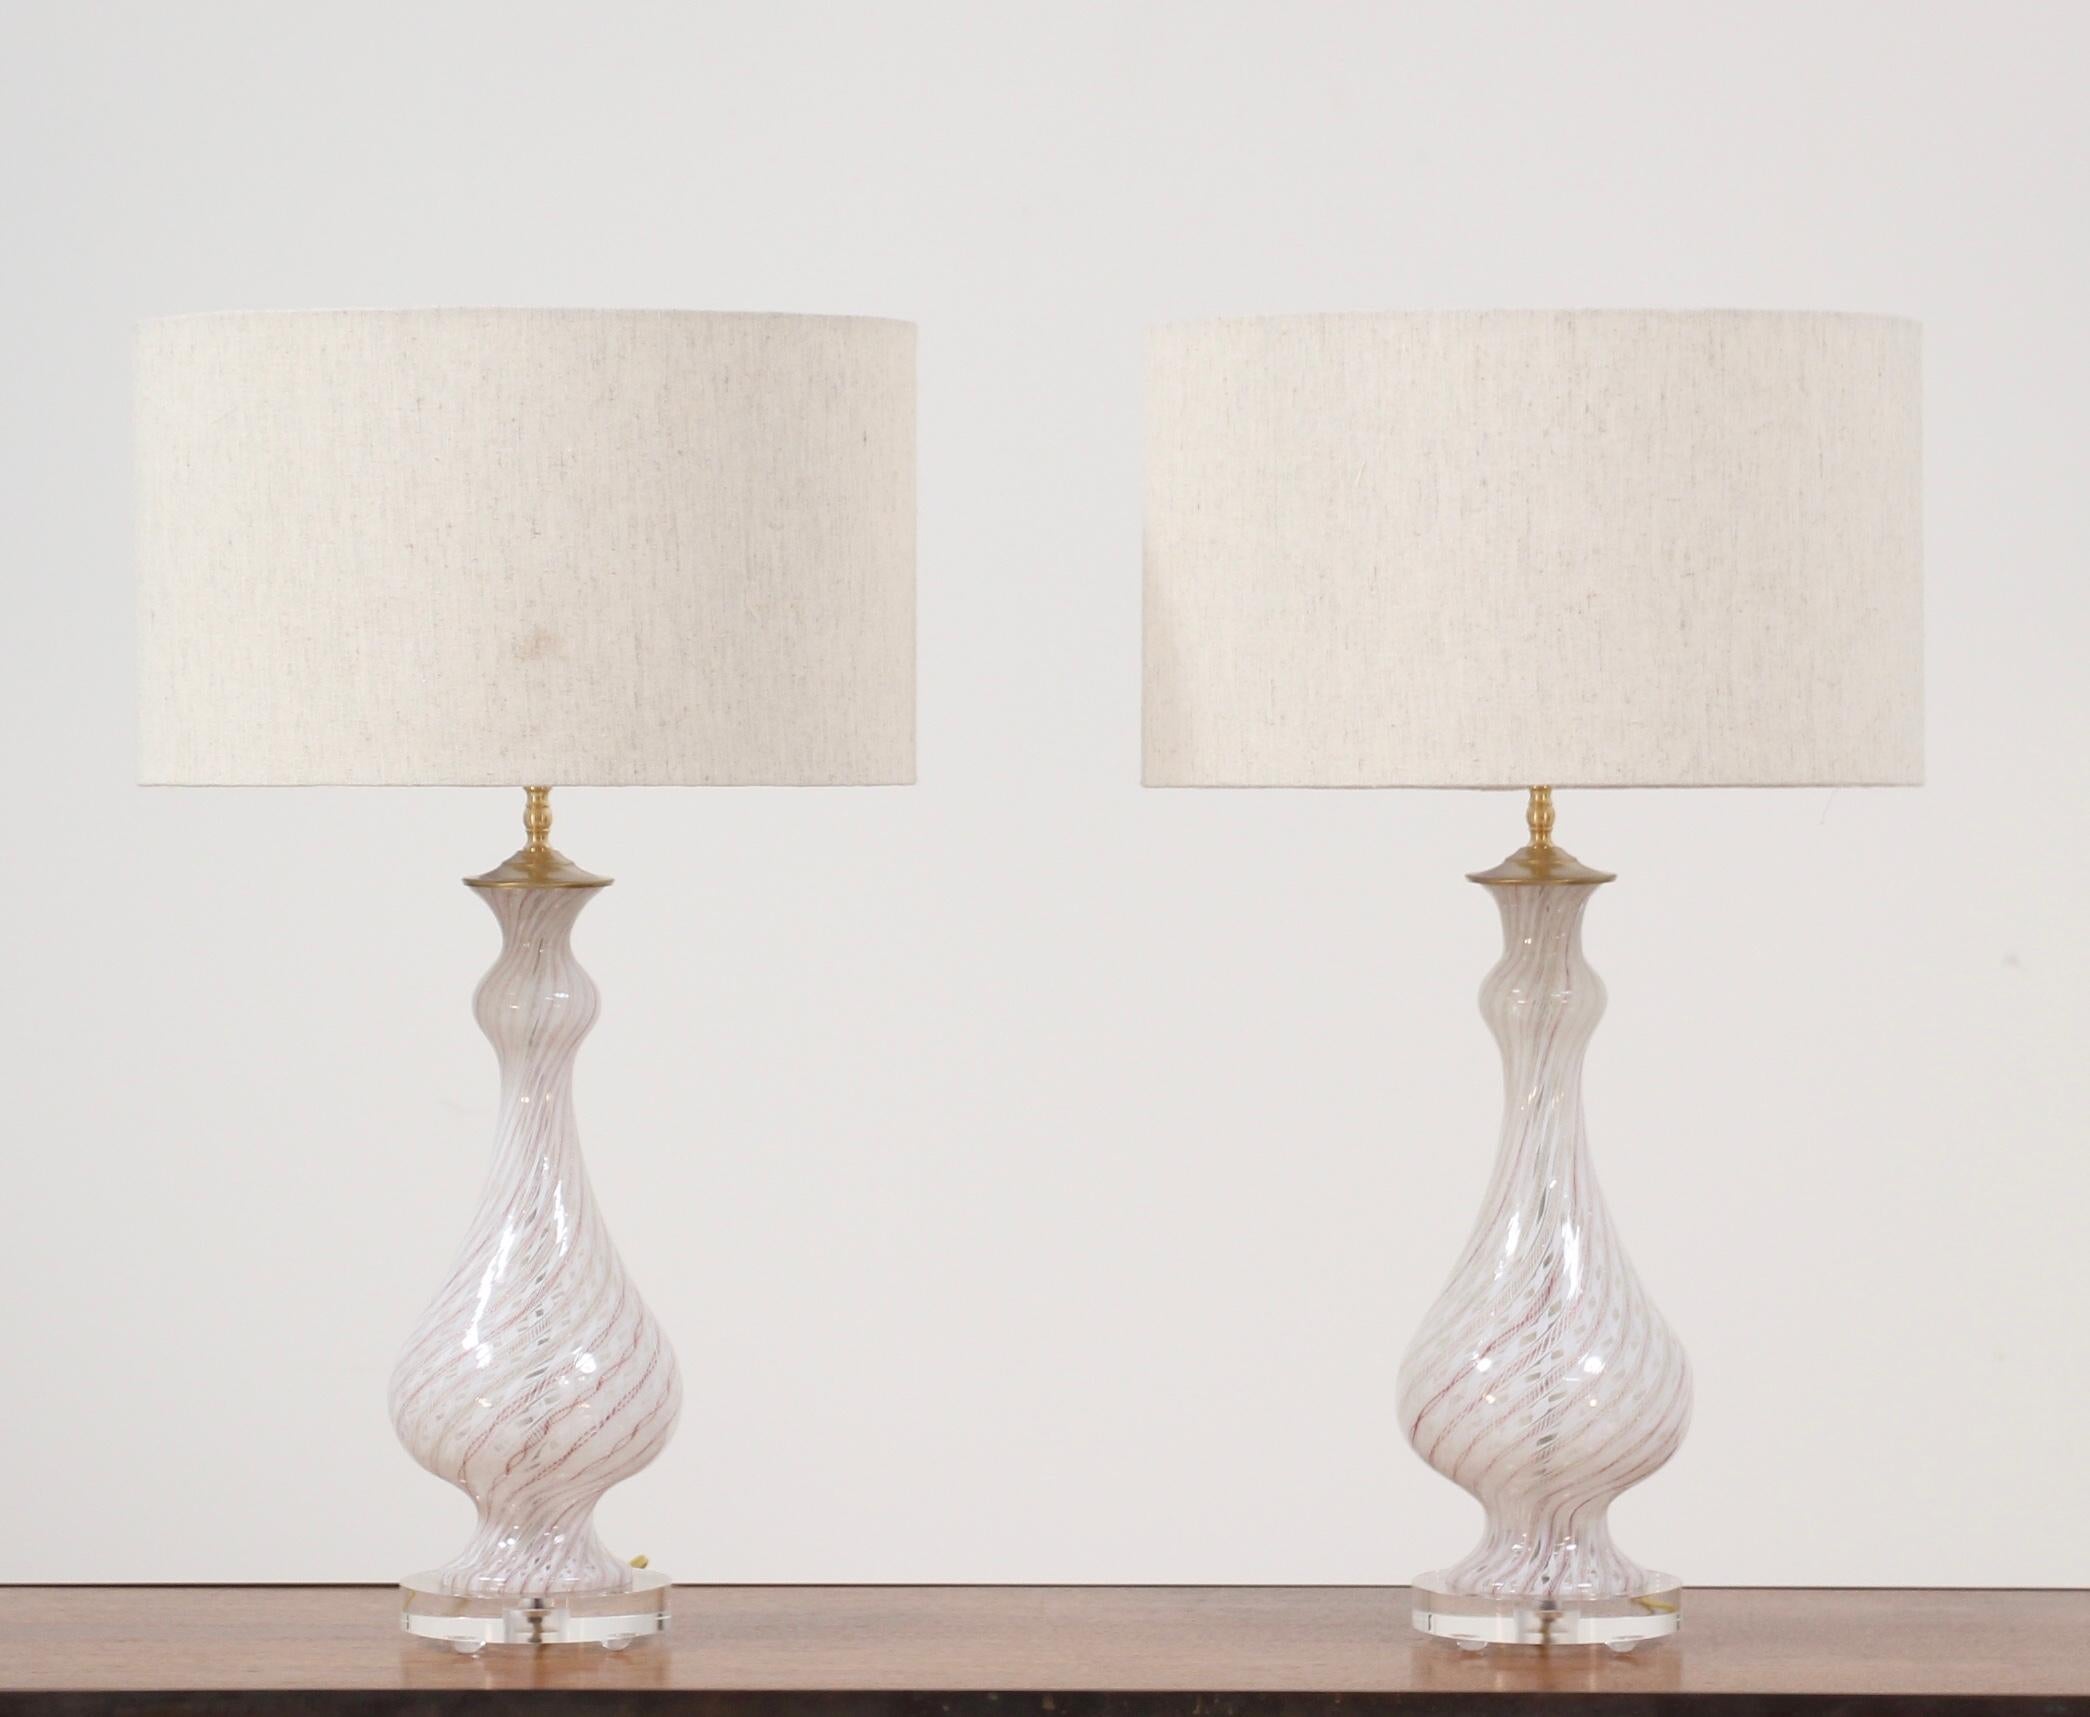 Pair of 1960s Italian Murano latticino glass lamps in a white, gold and red color way. These elegant lamps have been newly wired, their brass hardware has been polish and they have been mounted on new acrylic bases to complement their modernity. We